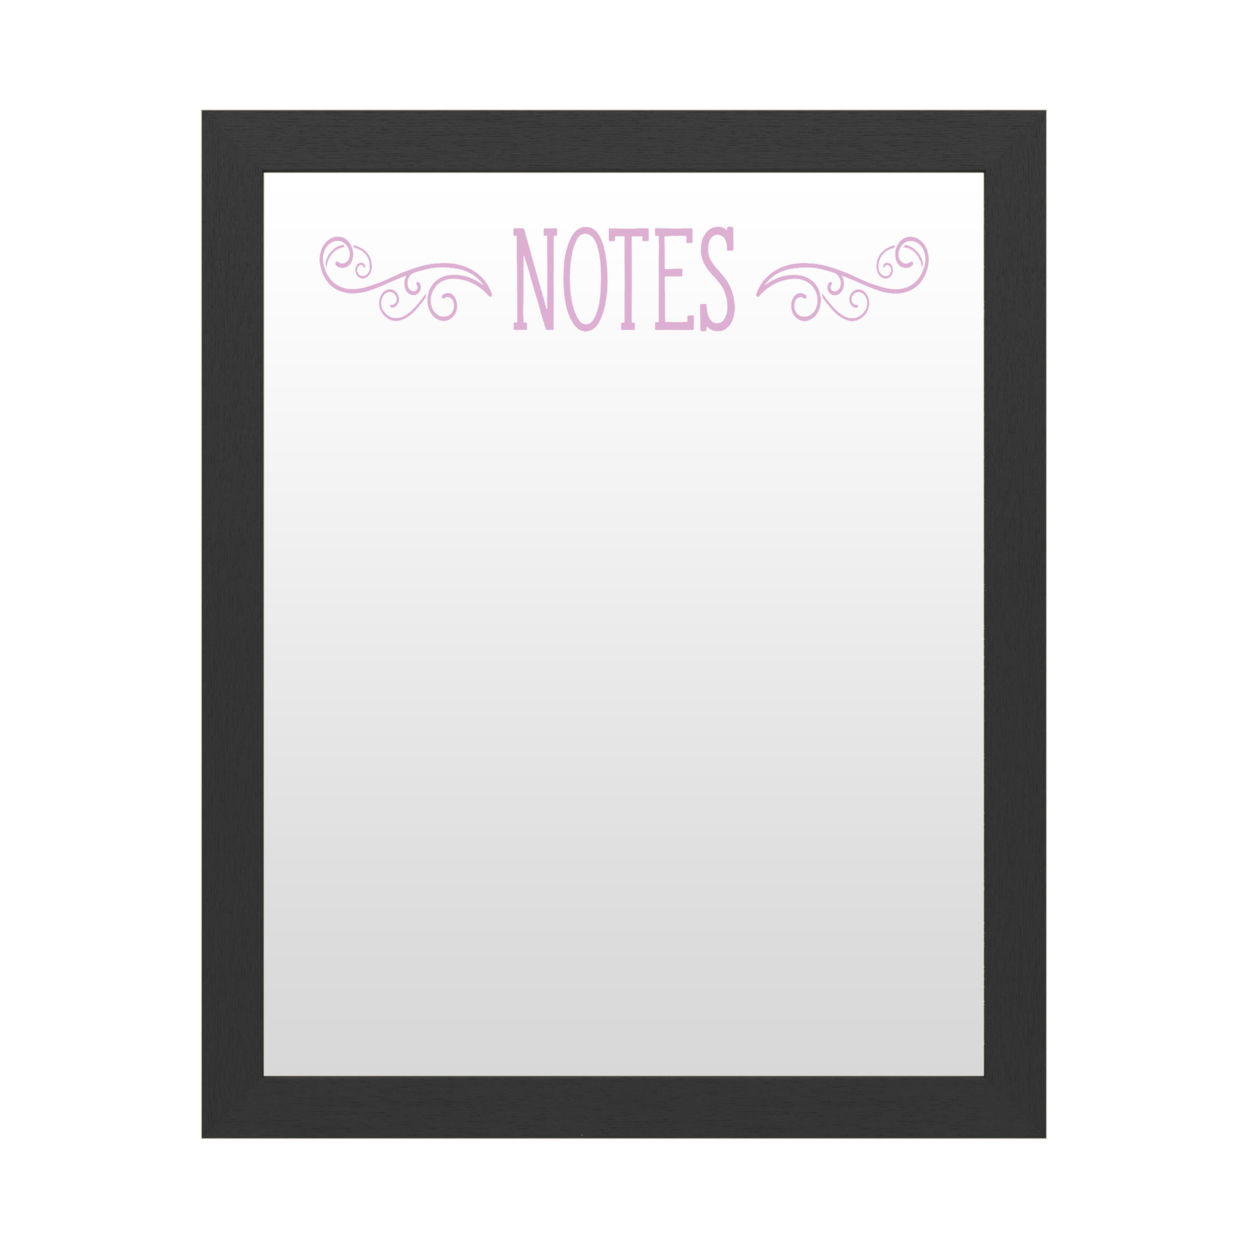 Dry Erase 16 X 20 Marker Board With Printed Artwork - Notes Serrif 2 White Board - Ready To Hang